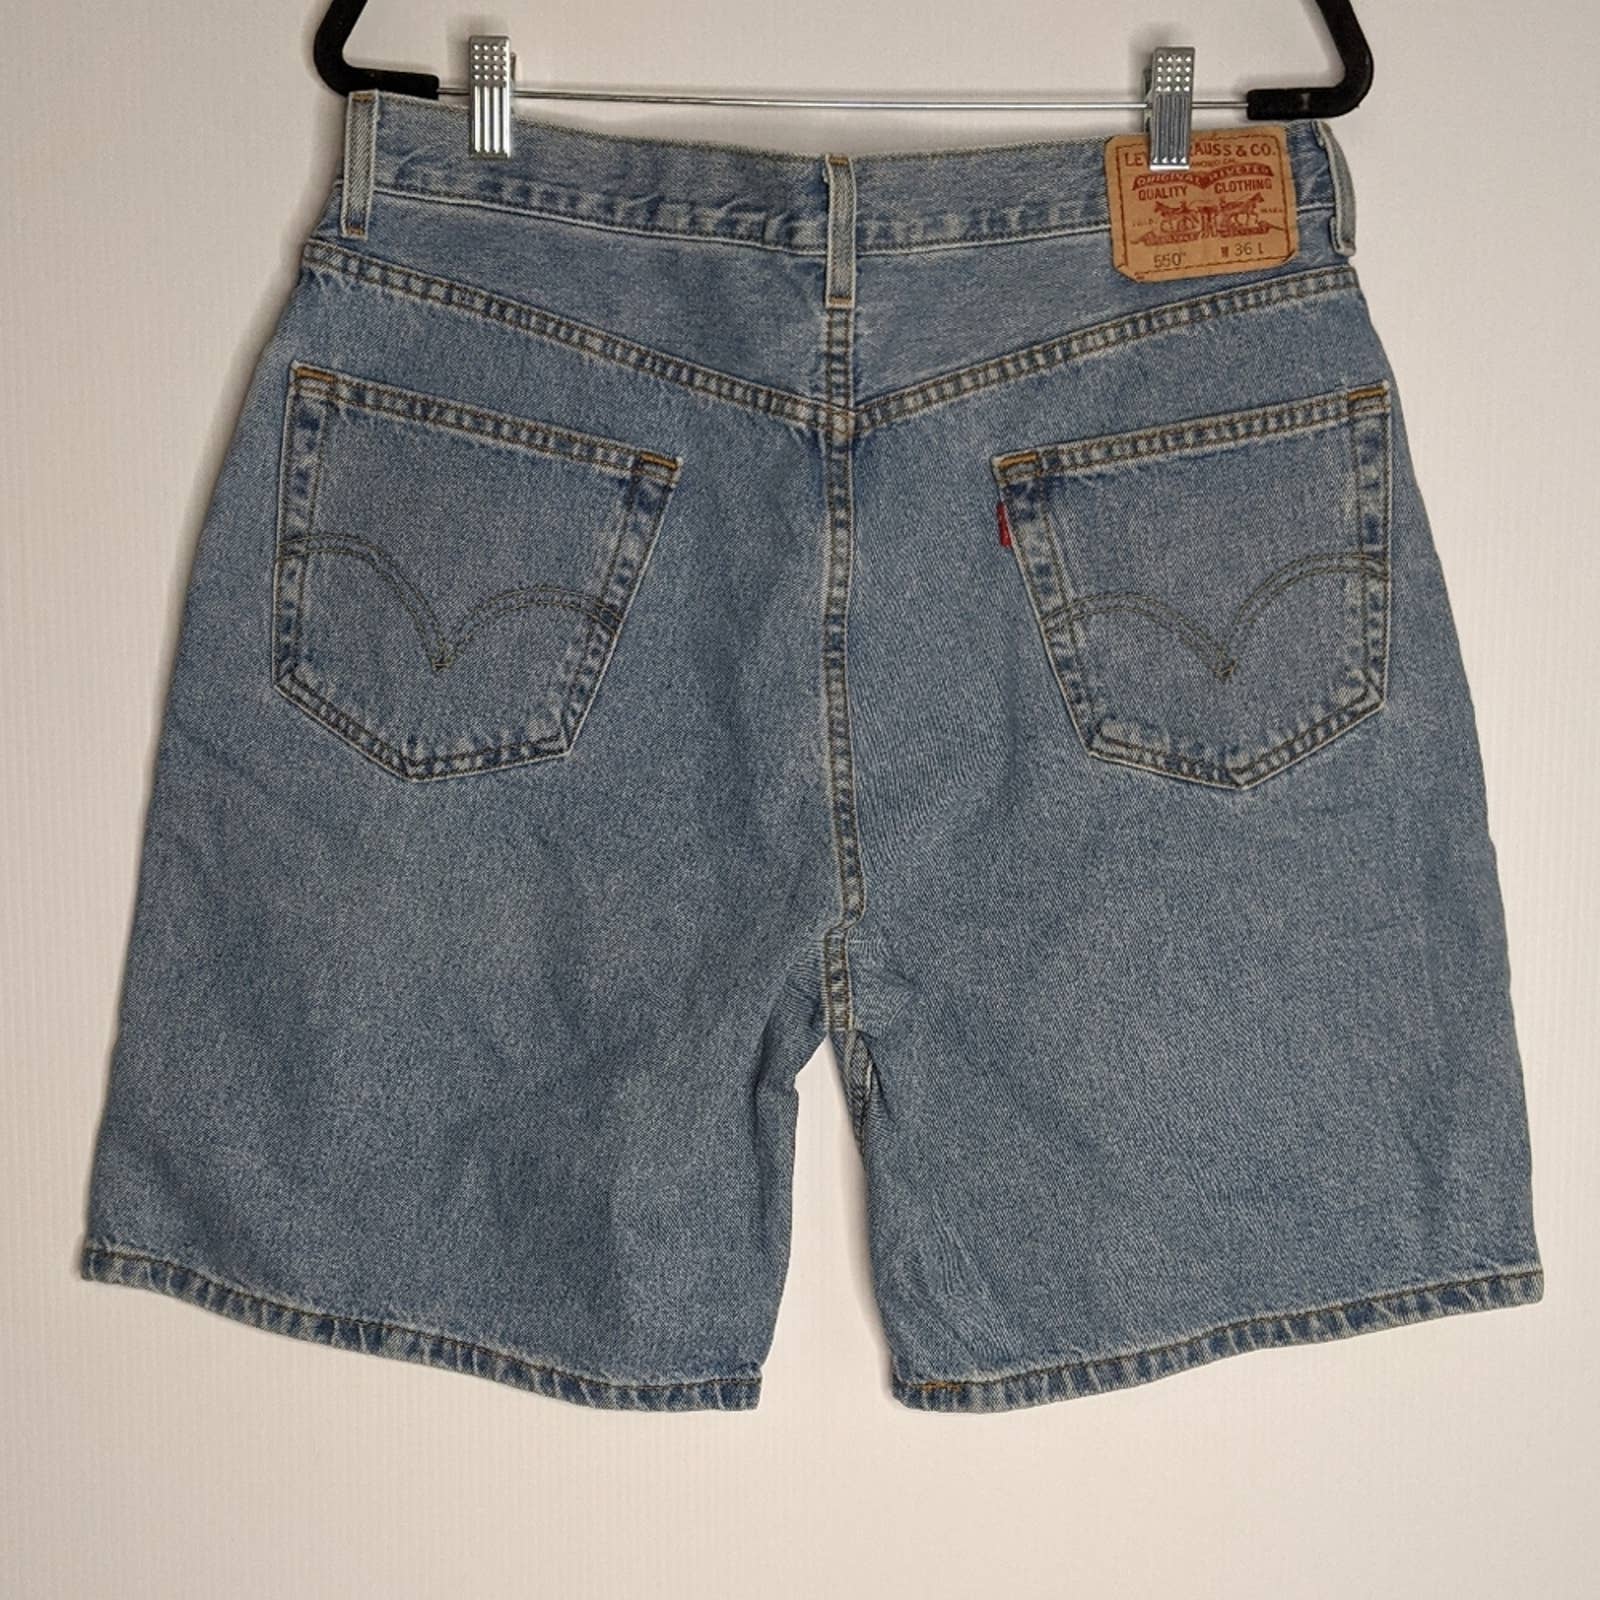 Levi's 550 Vintage Jean Shorts Made In Usa by Levi's | Shop THRILLING